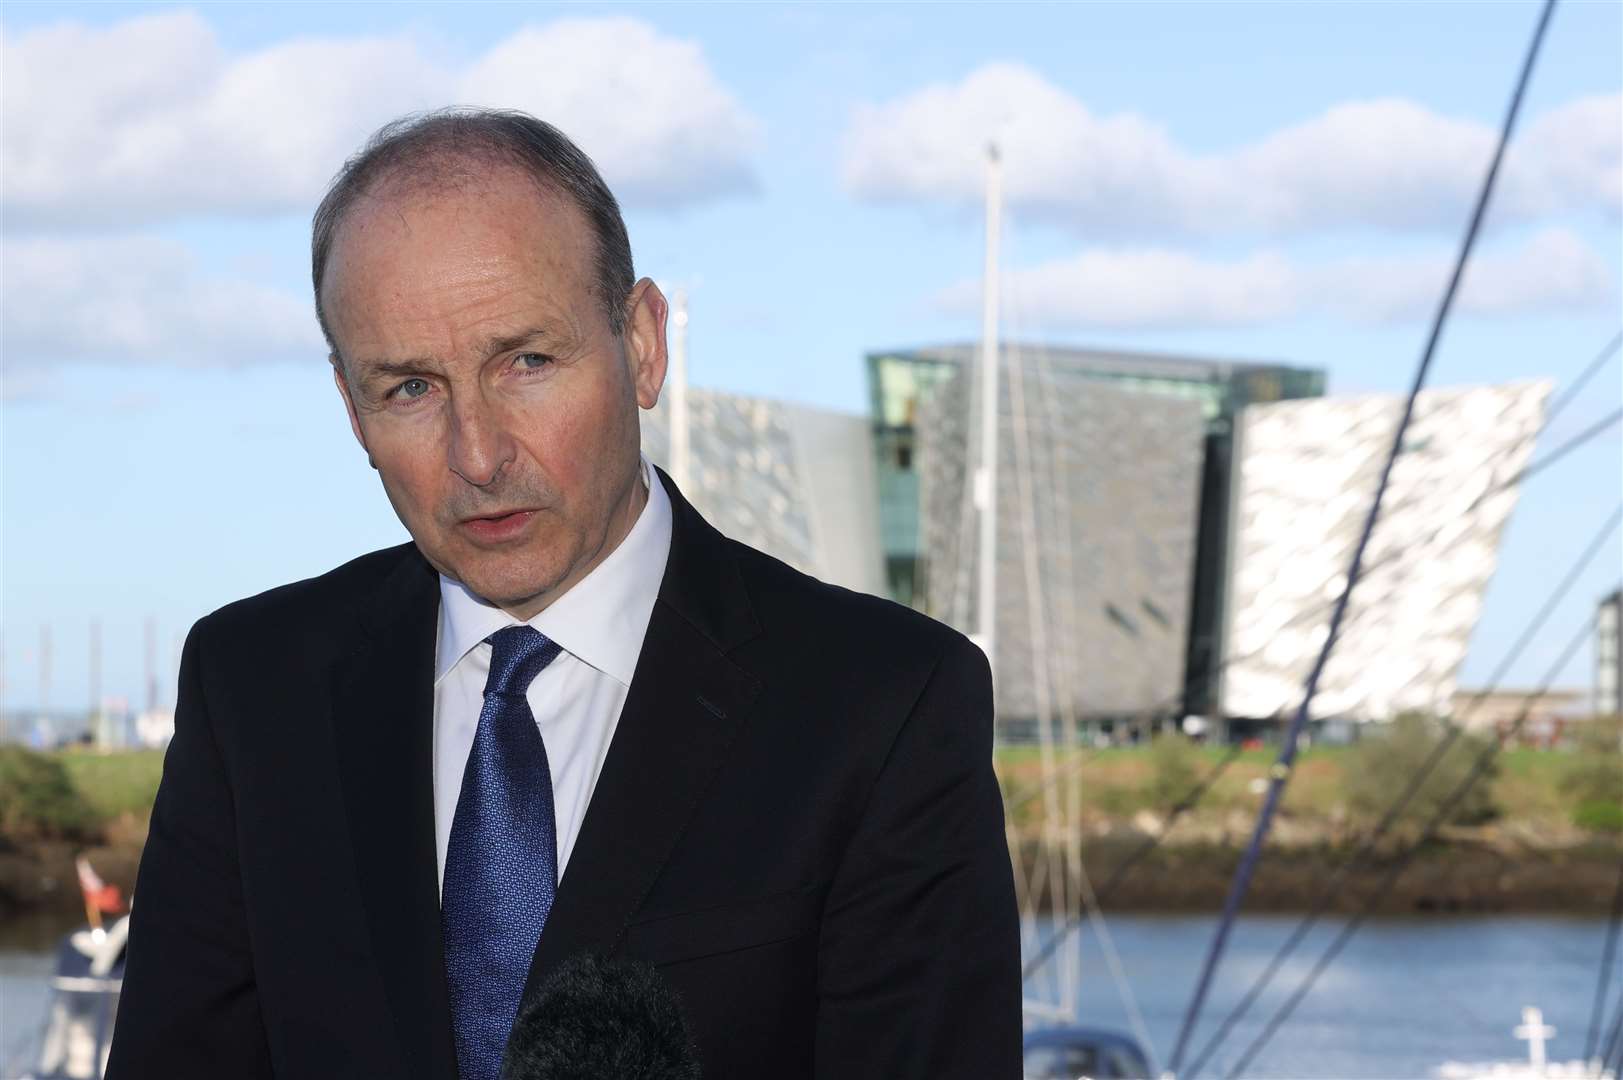 Micheal Martin speaking to the media outside SSE Arena Belfast as he carries out engagements in the city (Liam McBurney/PA)